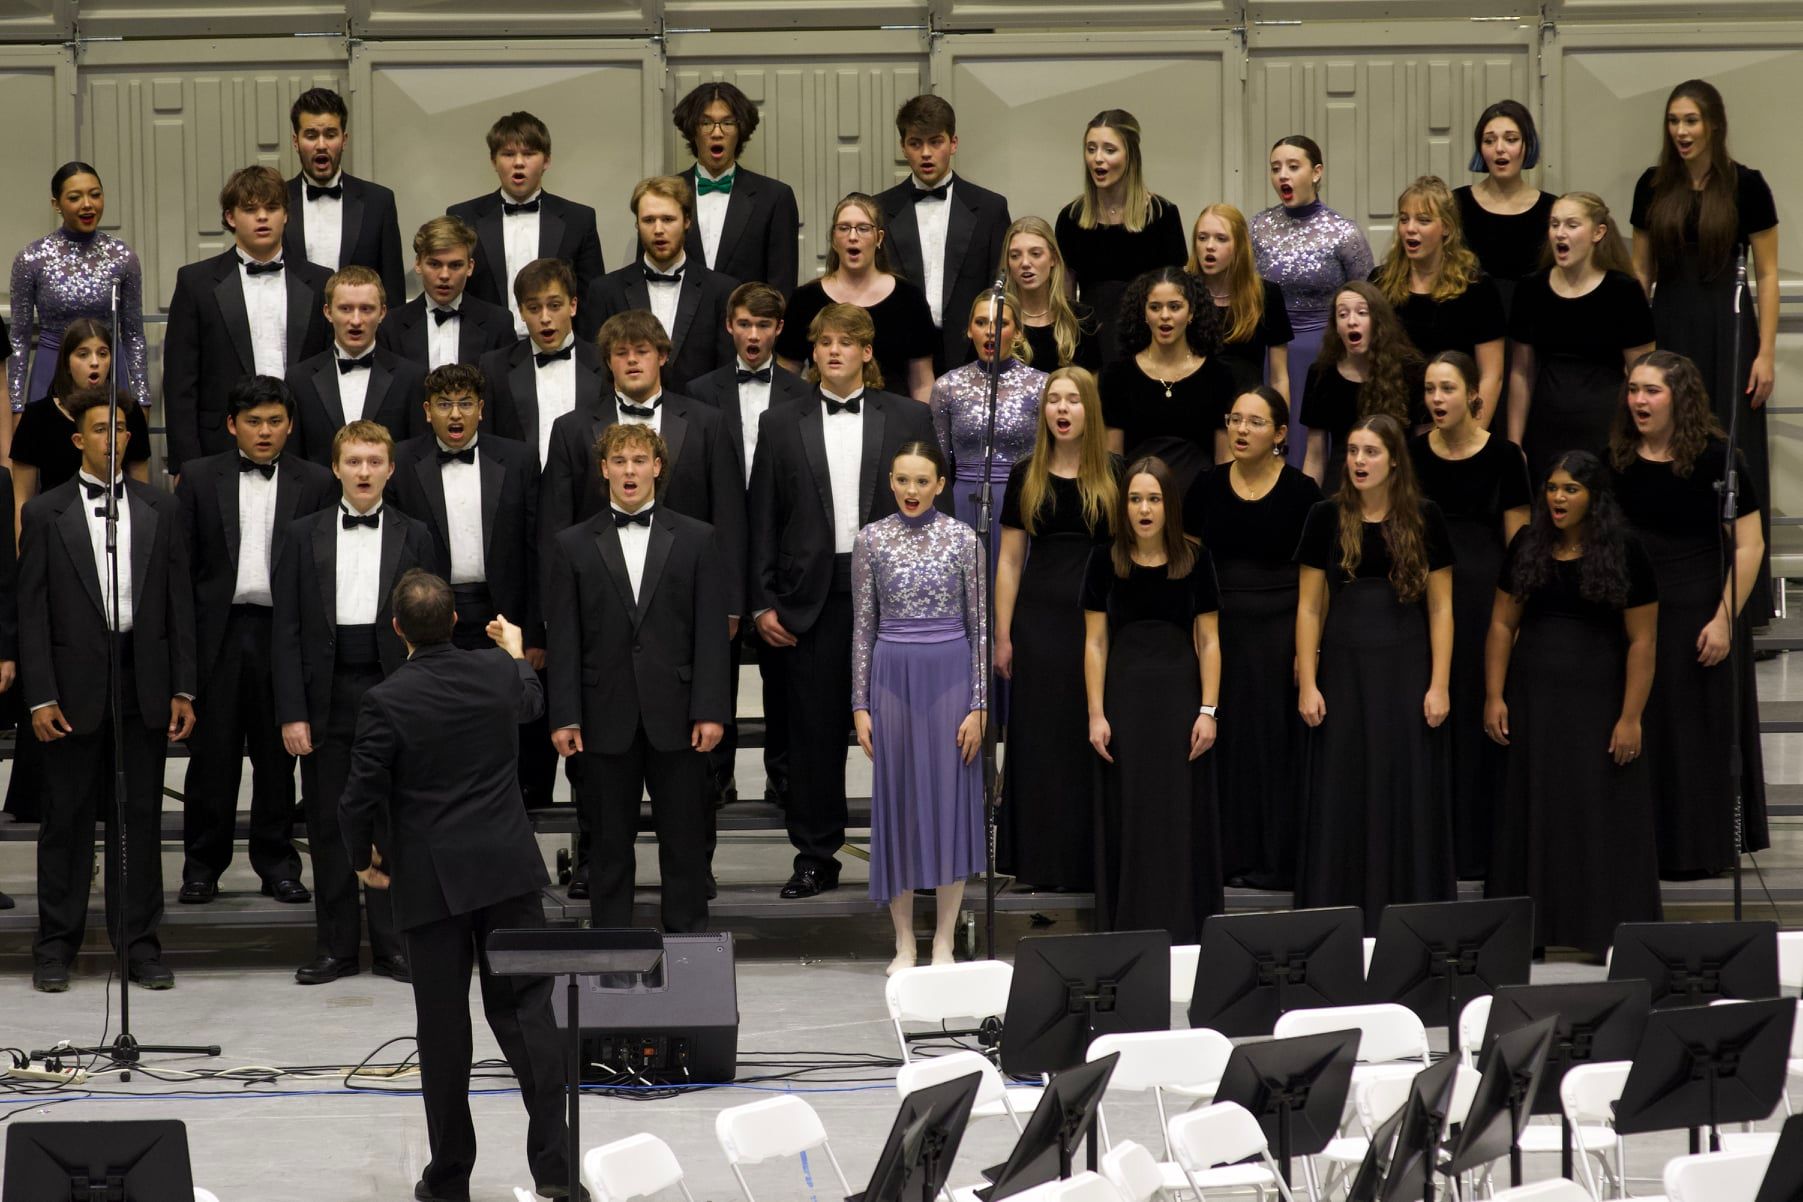 BHS Chamber Chorus performs at the 2021 Community Holiday Concert (credit Rebecca Moon)